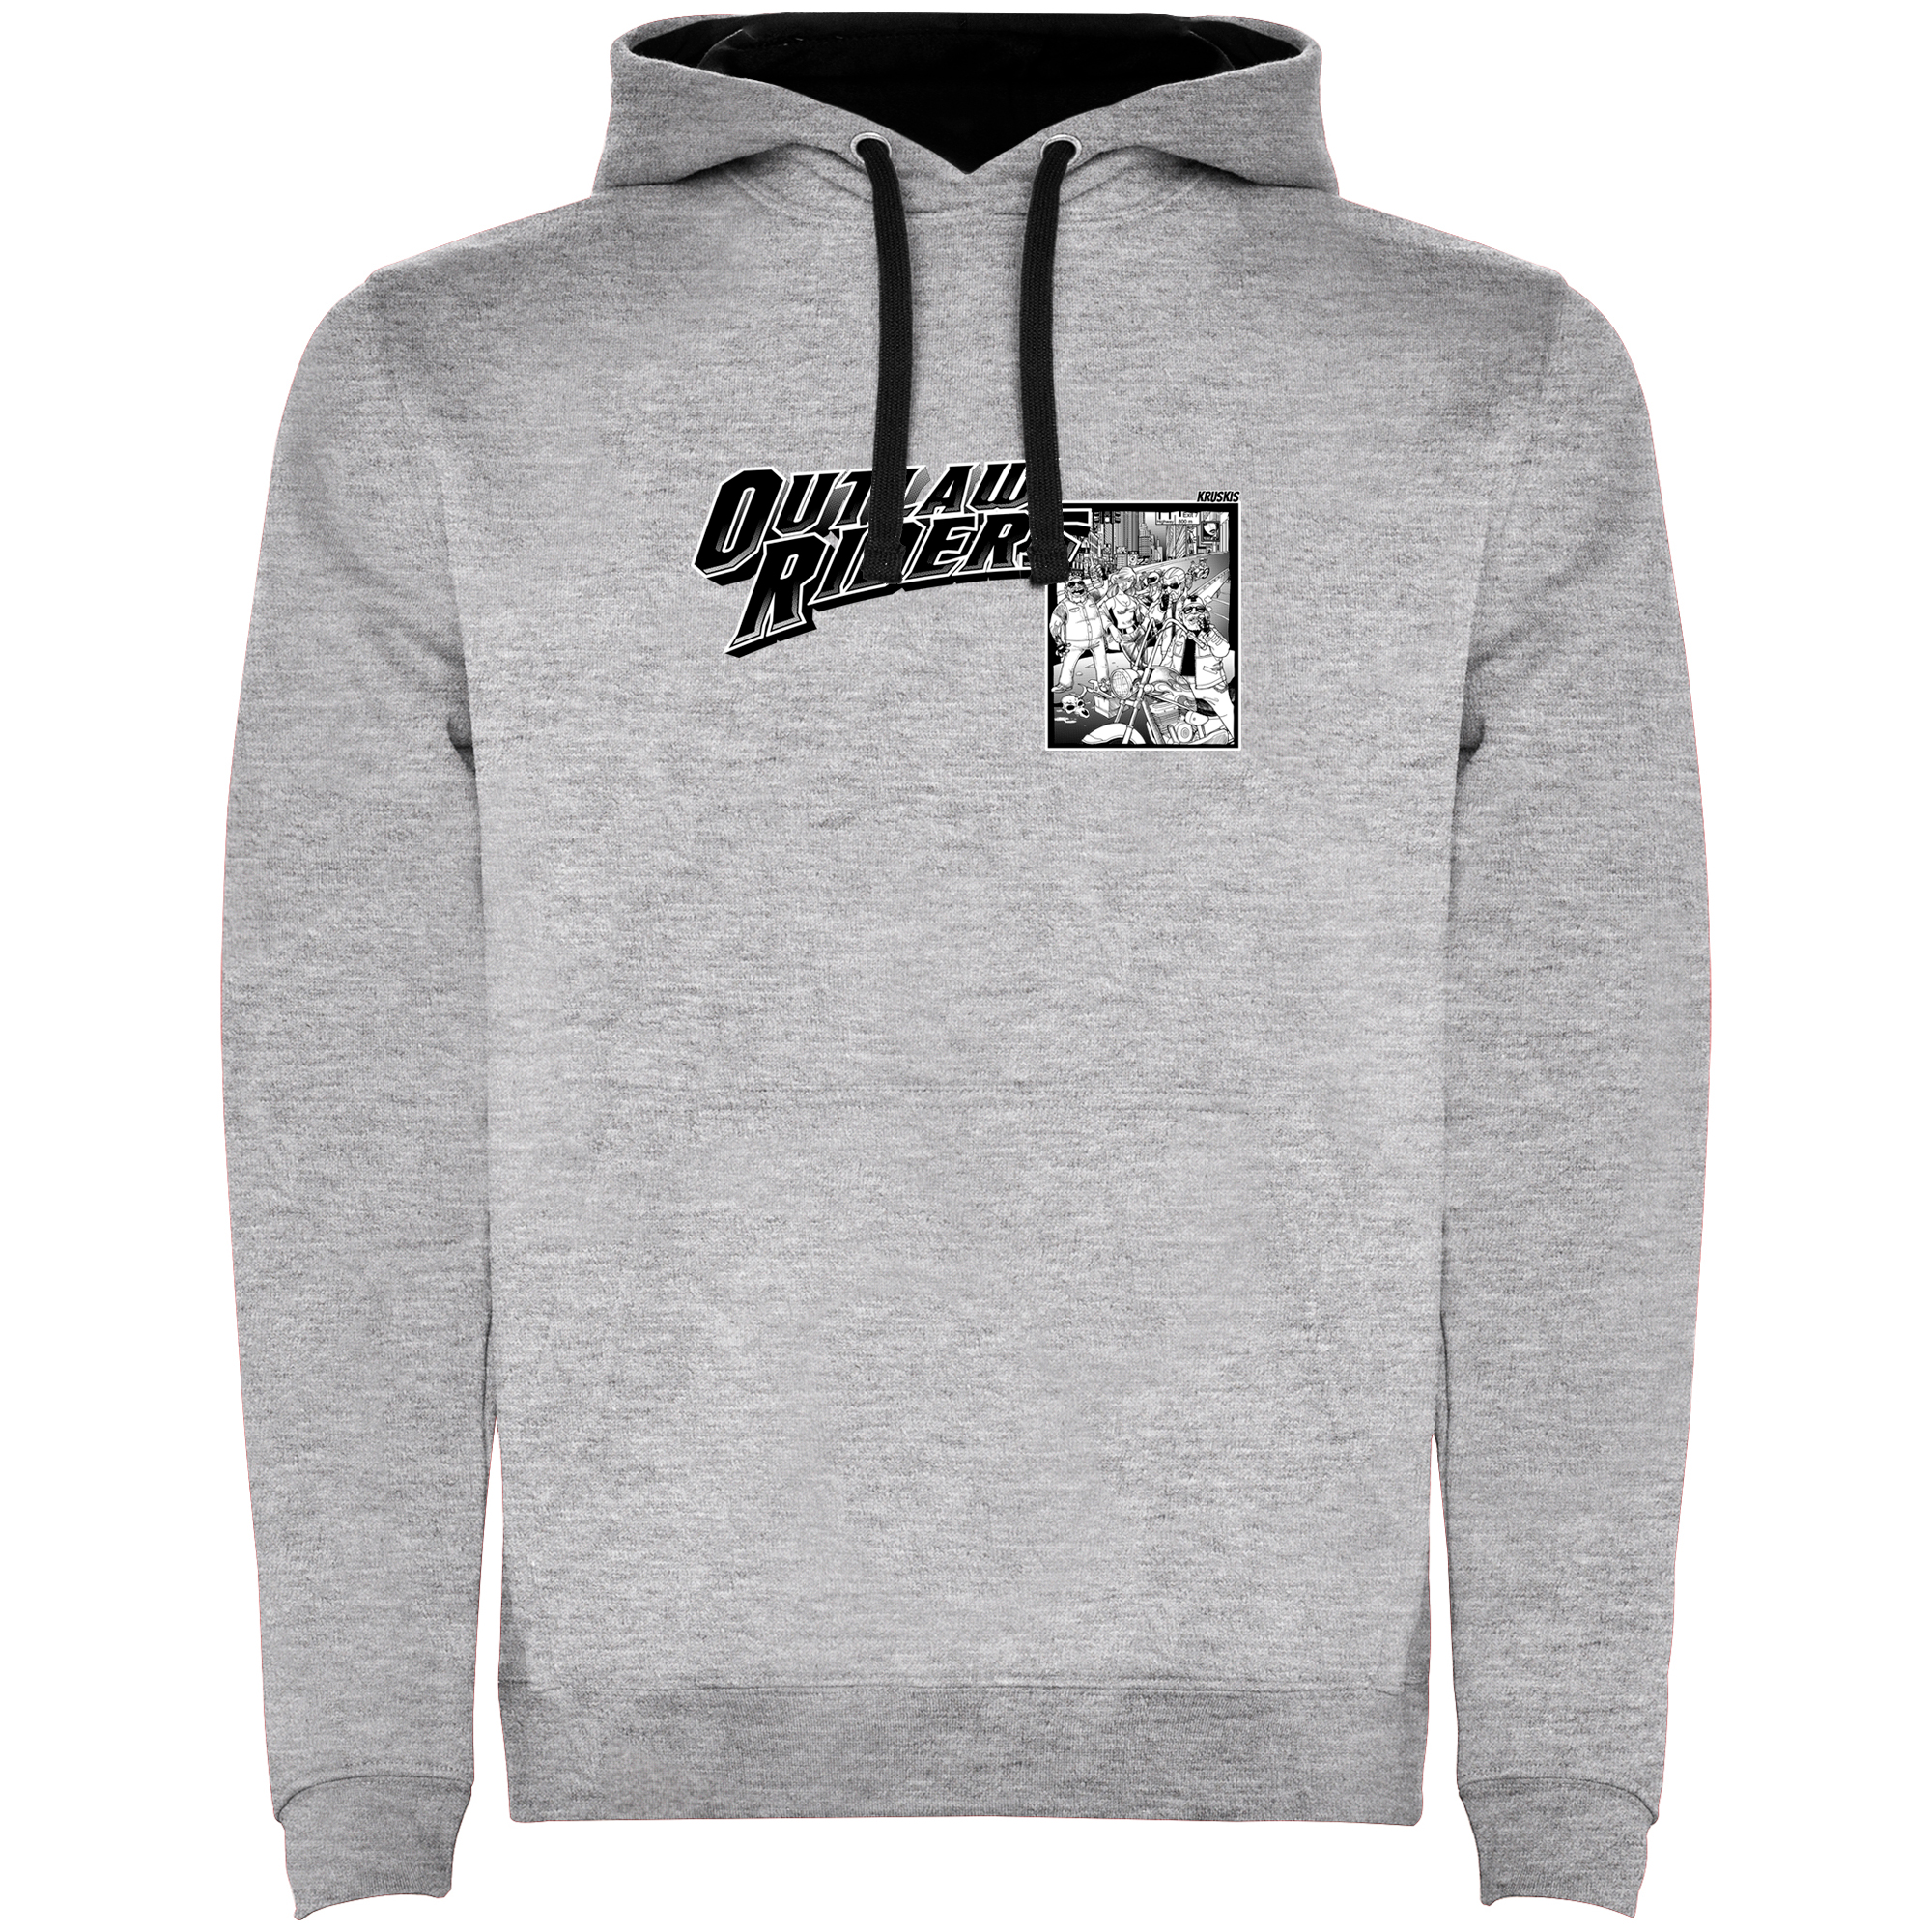 Sweat a Capuche Moto Outlaw Riders Unisex